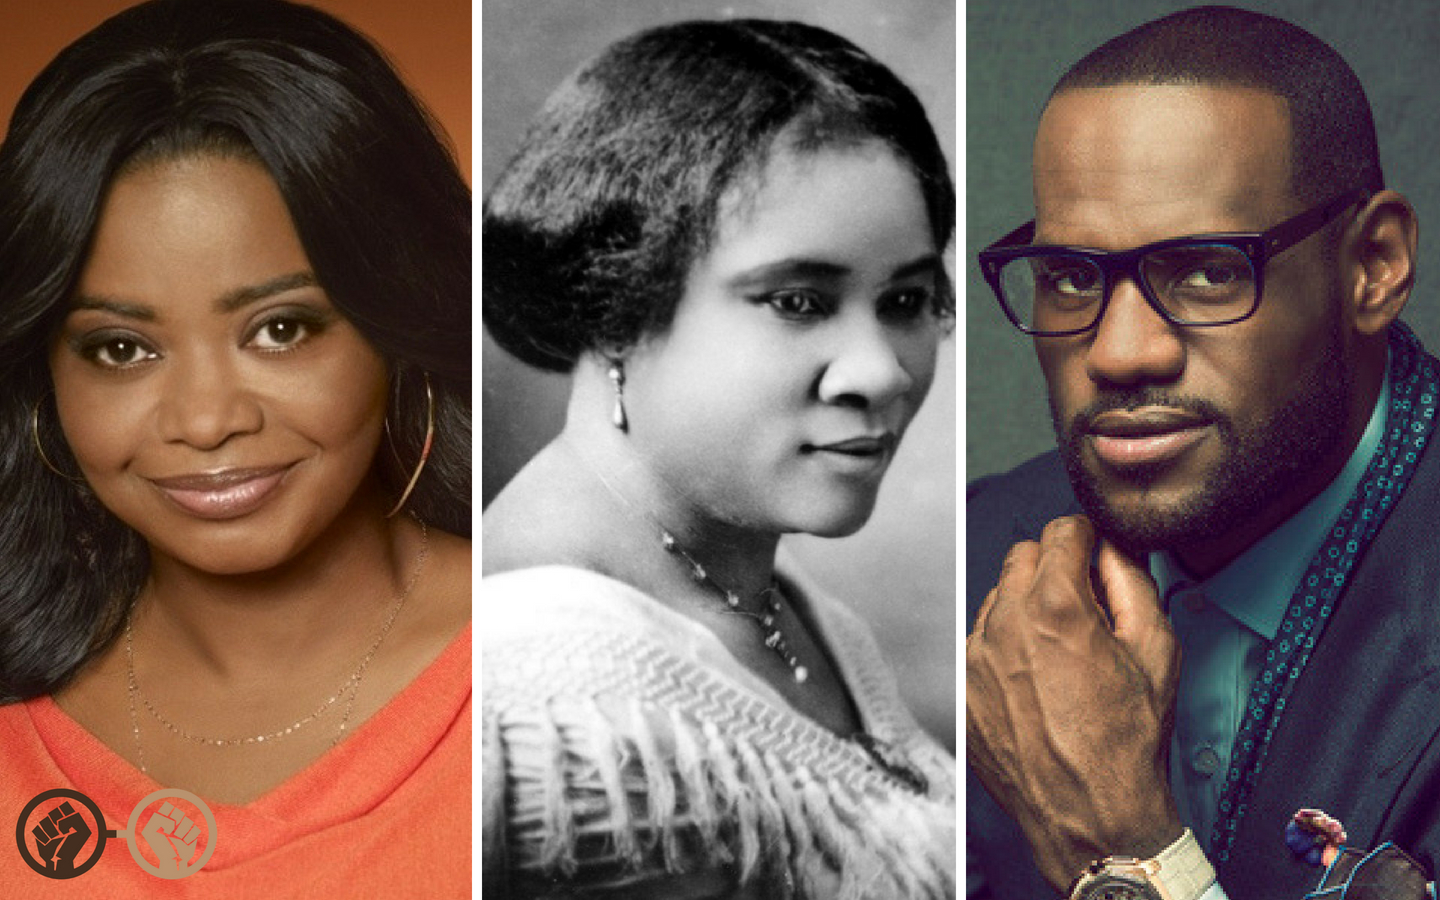 Madam C.J. Walker Mini-Series Executive Produced By Octavia Spencer and LeBron James Coming to Netflix